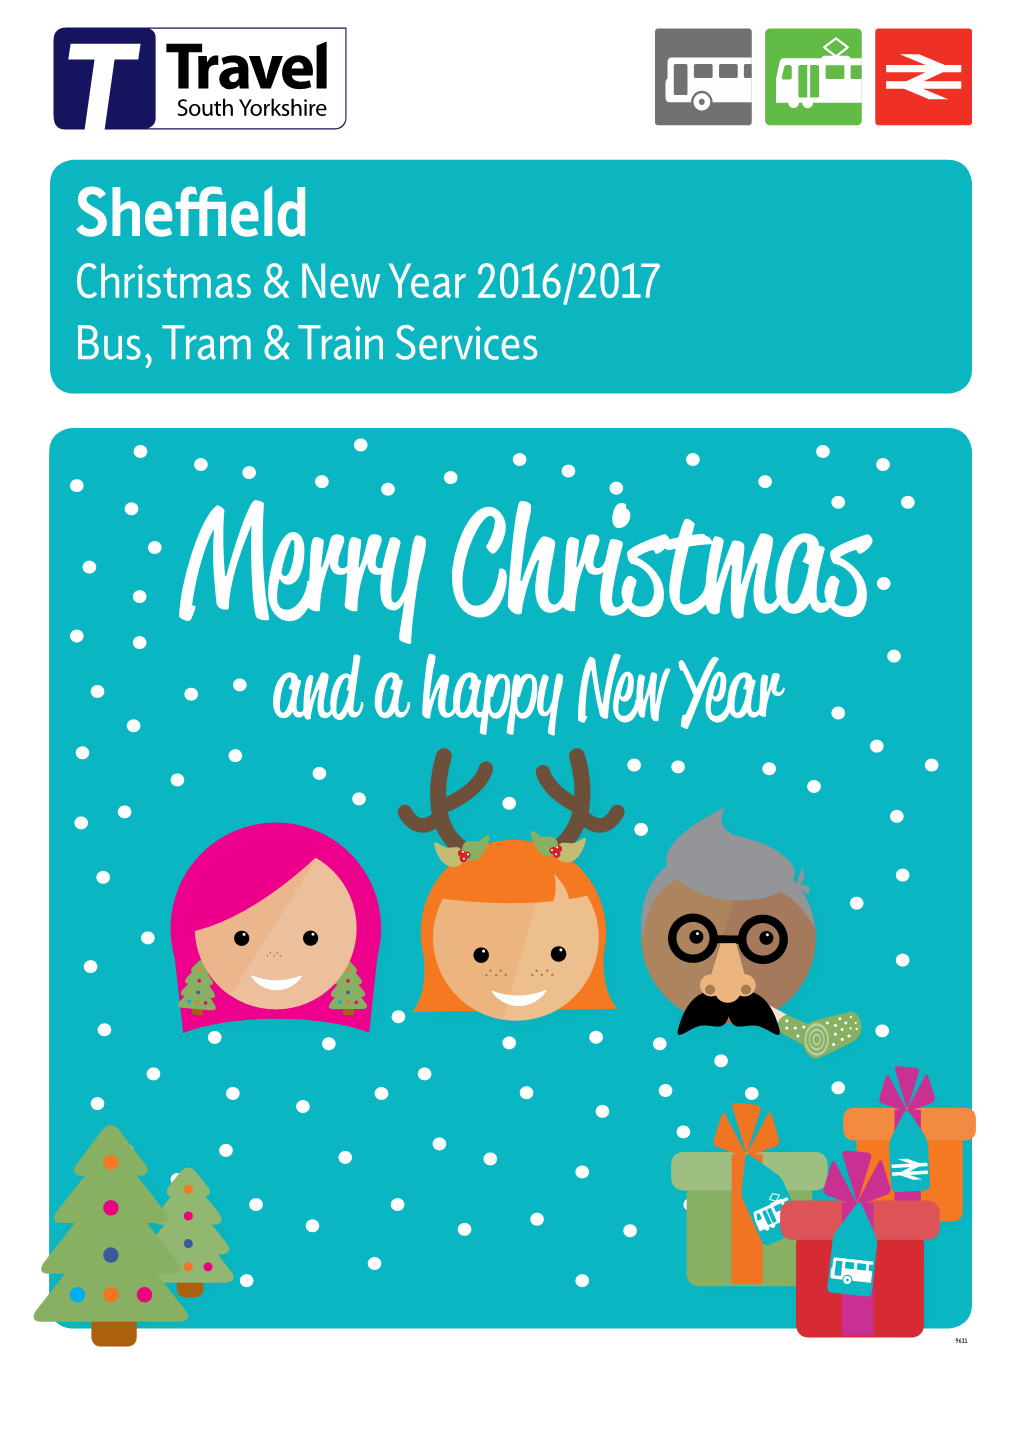 Sheffield Christmas & New Year 2016/2017 Bus, Tram & Train Services Merry Christmas and a Happy New Year